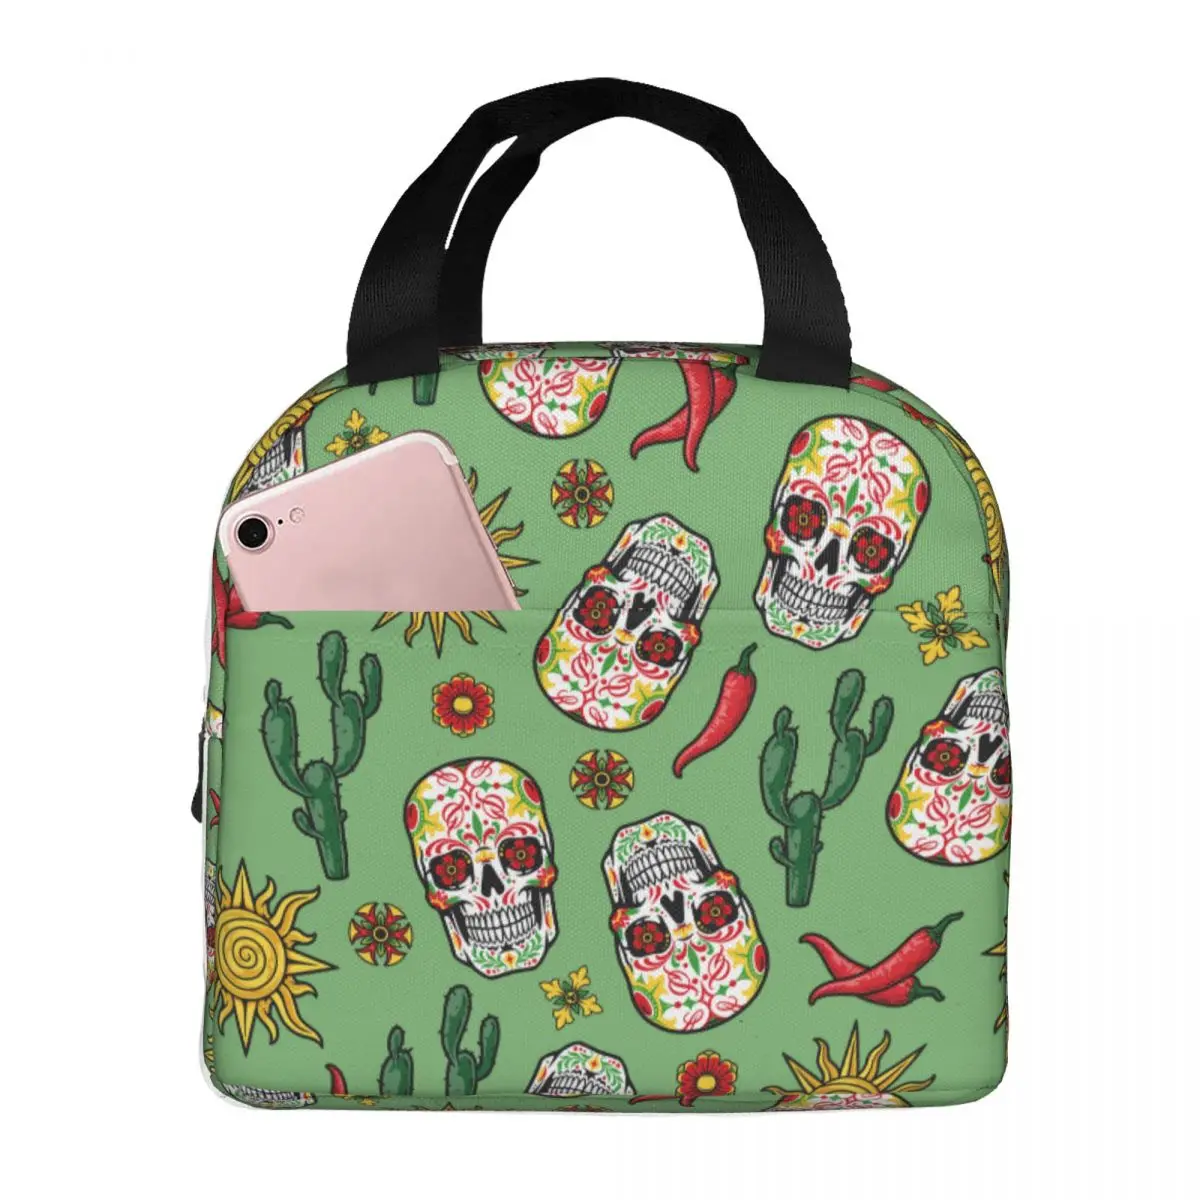 Lunch Bag for Women Kids Colorful Vintage Mexican Sugar Skull Thermal Cooler Bags Portable Picnic Travel Oxford Tote Bento Pouch